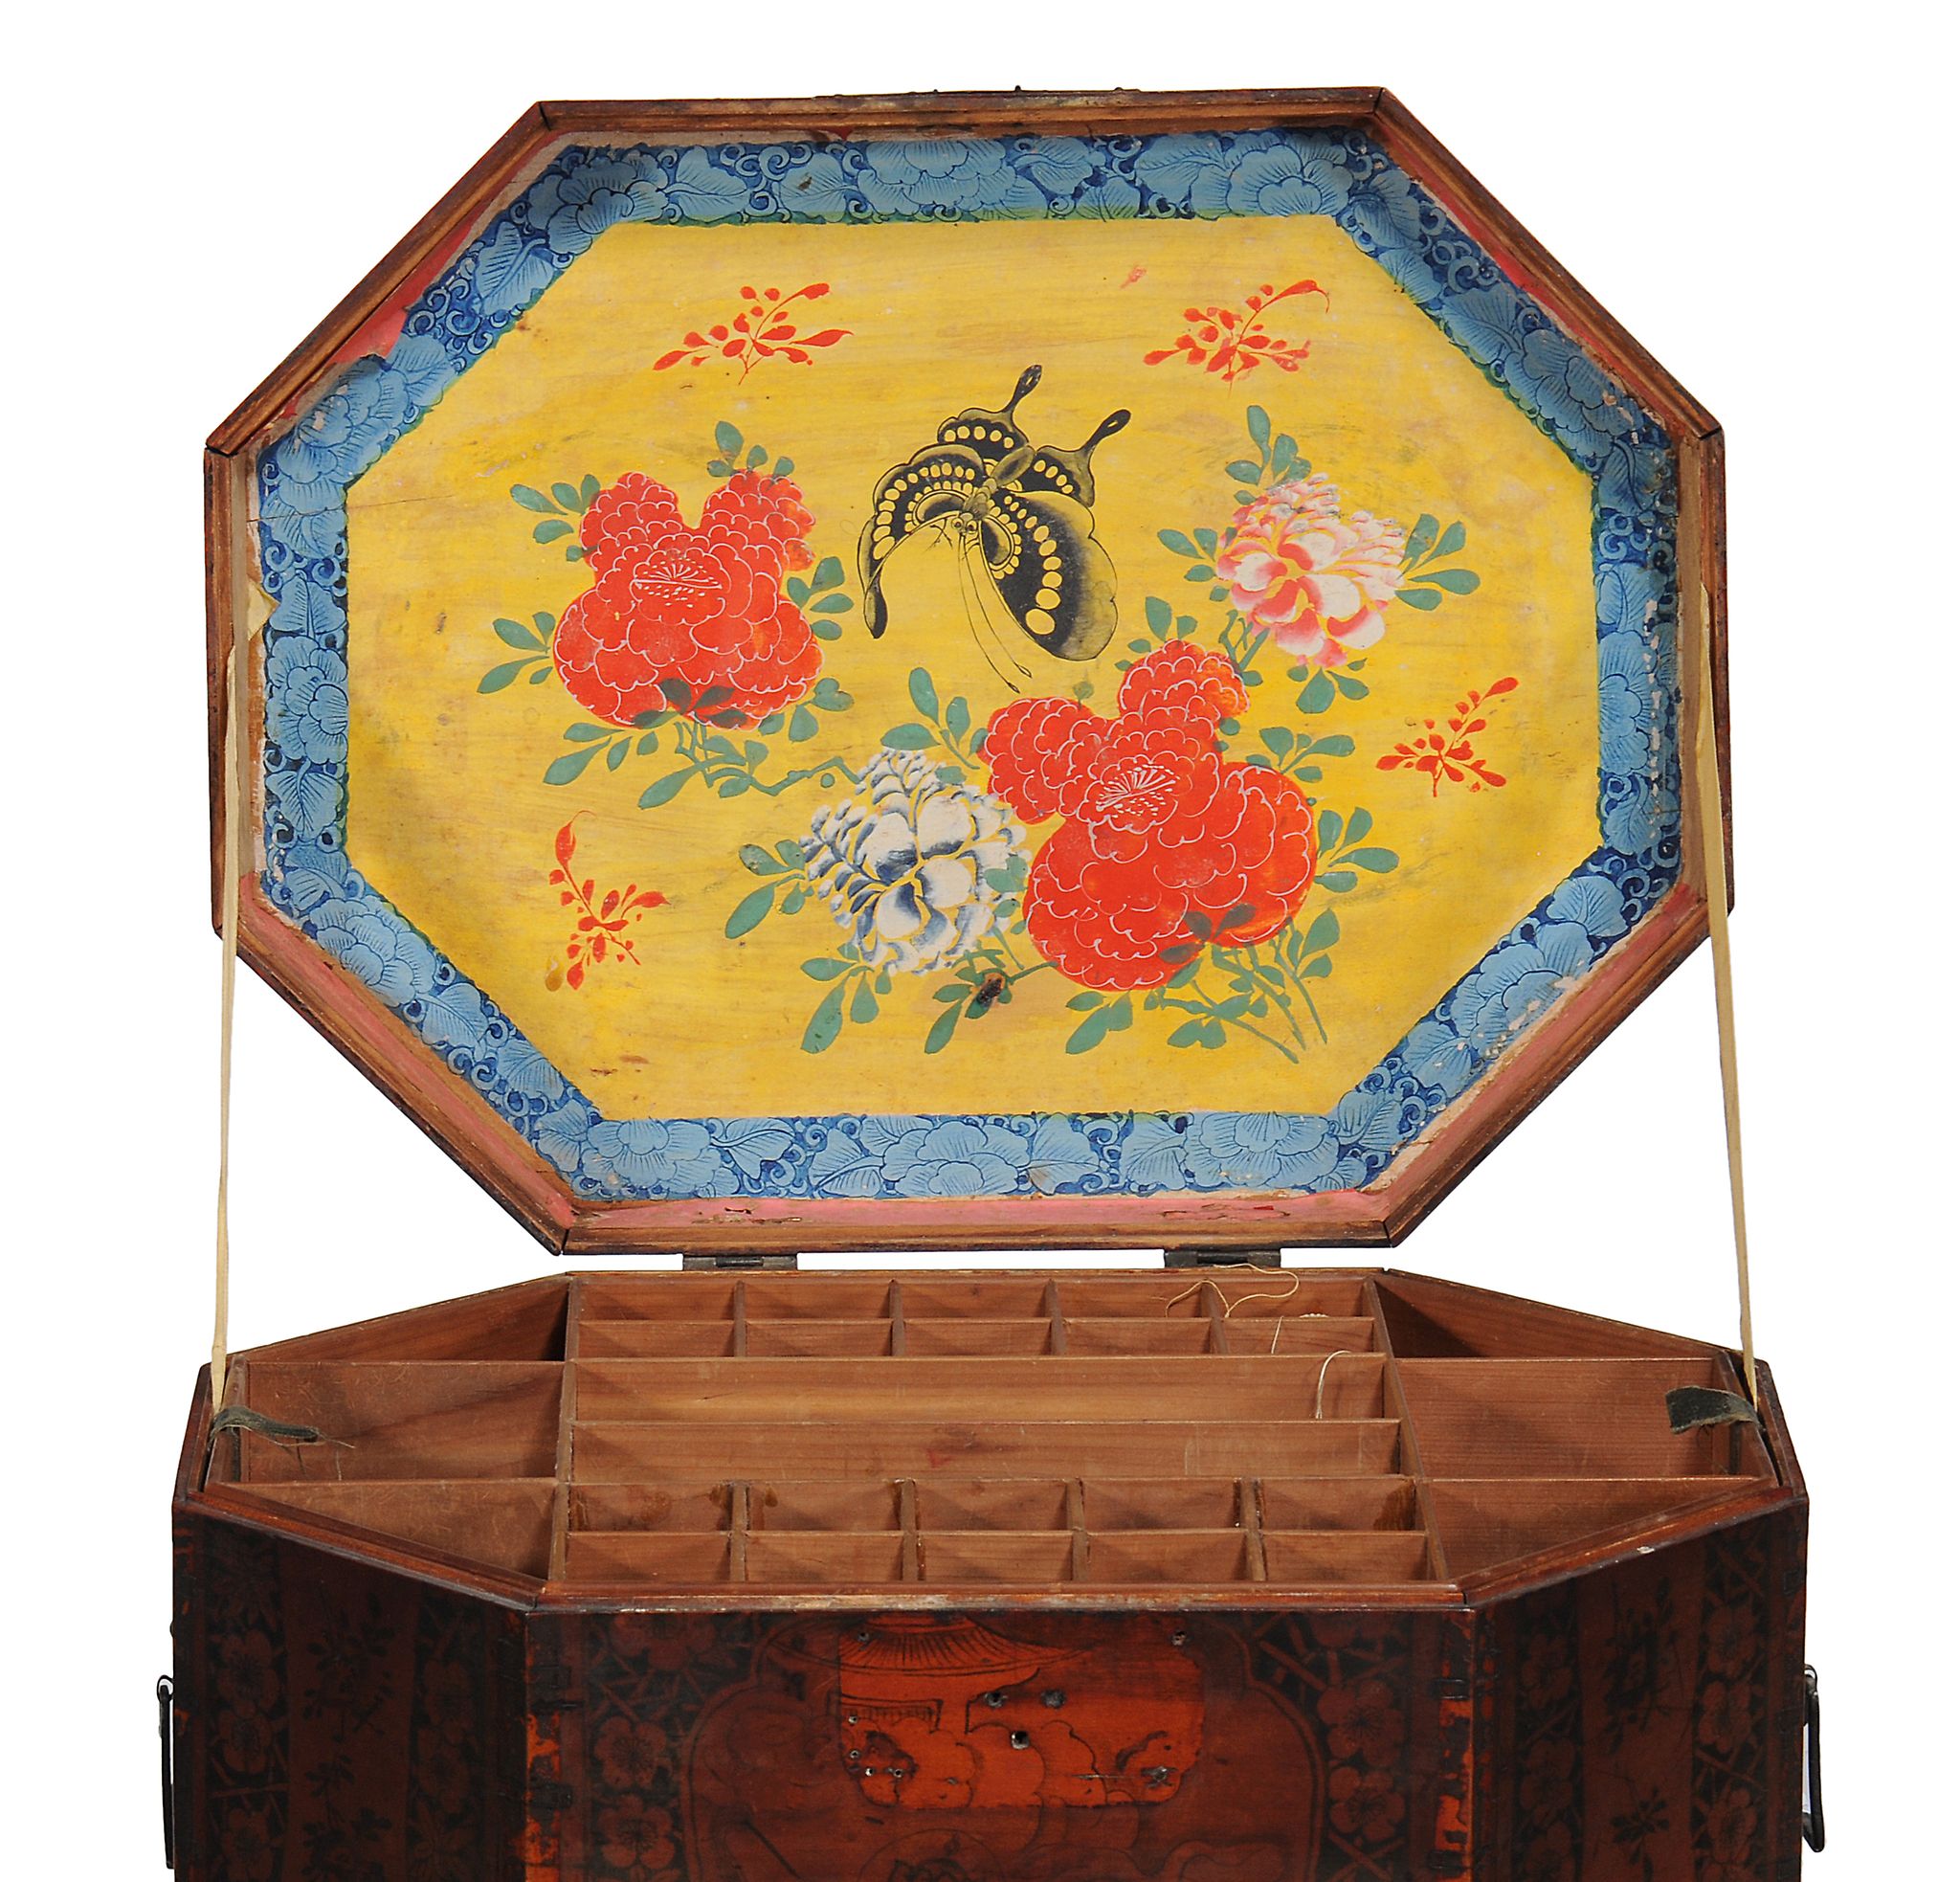 A Chinese red lacquer work box on stand  , the box early 19th century, on later associated stand, - Image 2 of 2